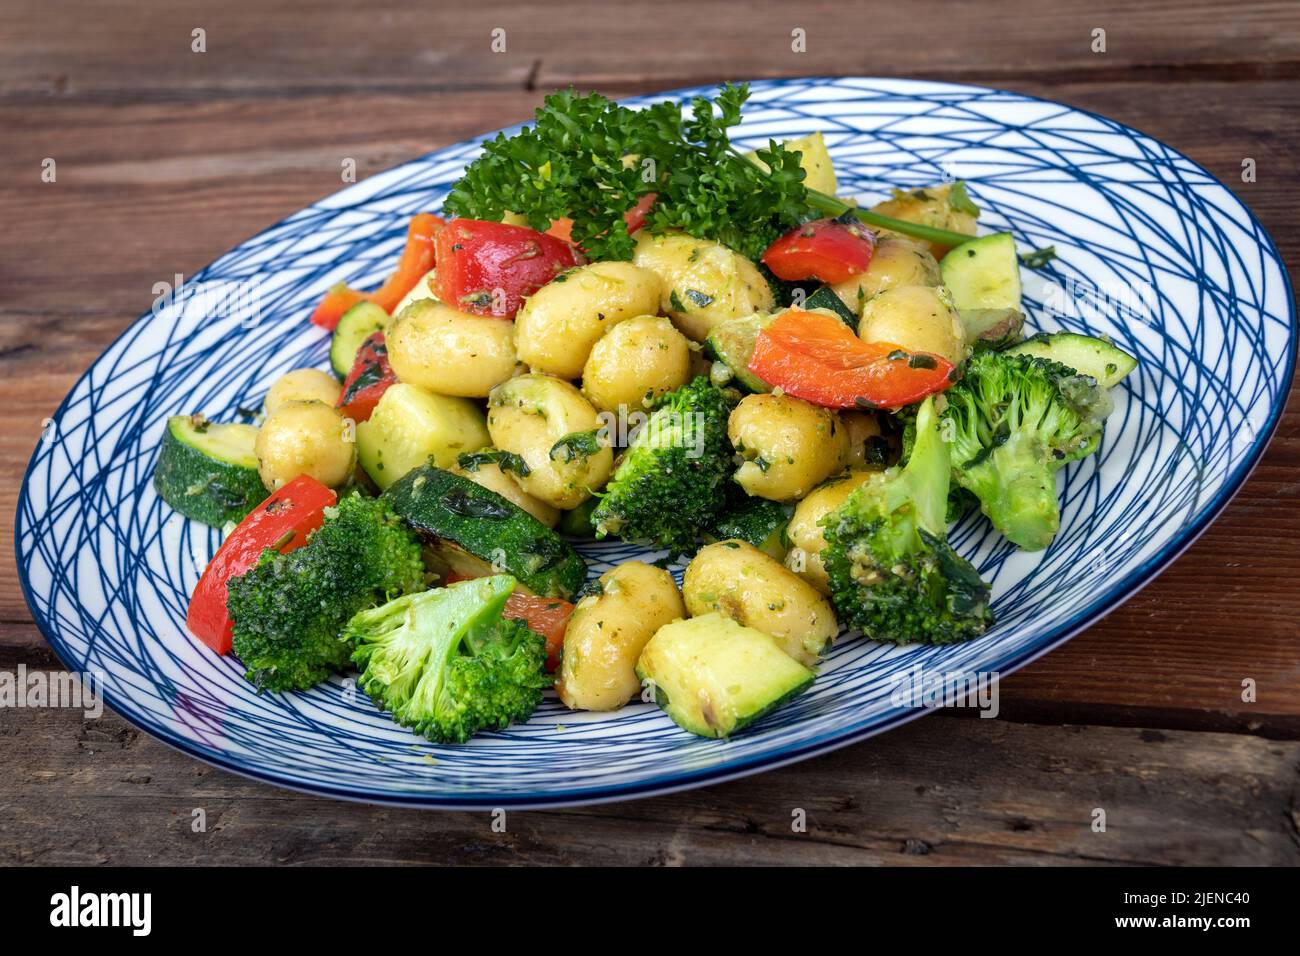 Herb and cheese gnocci pasta with veggies dish on table Stock Photo